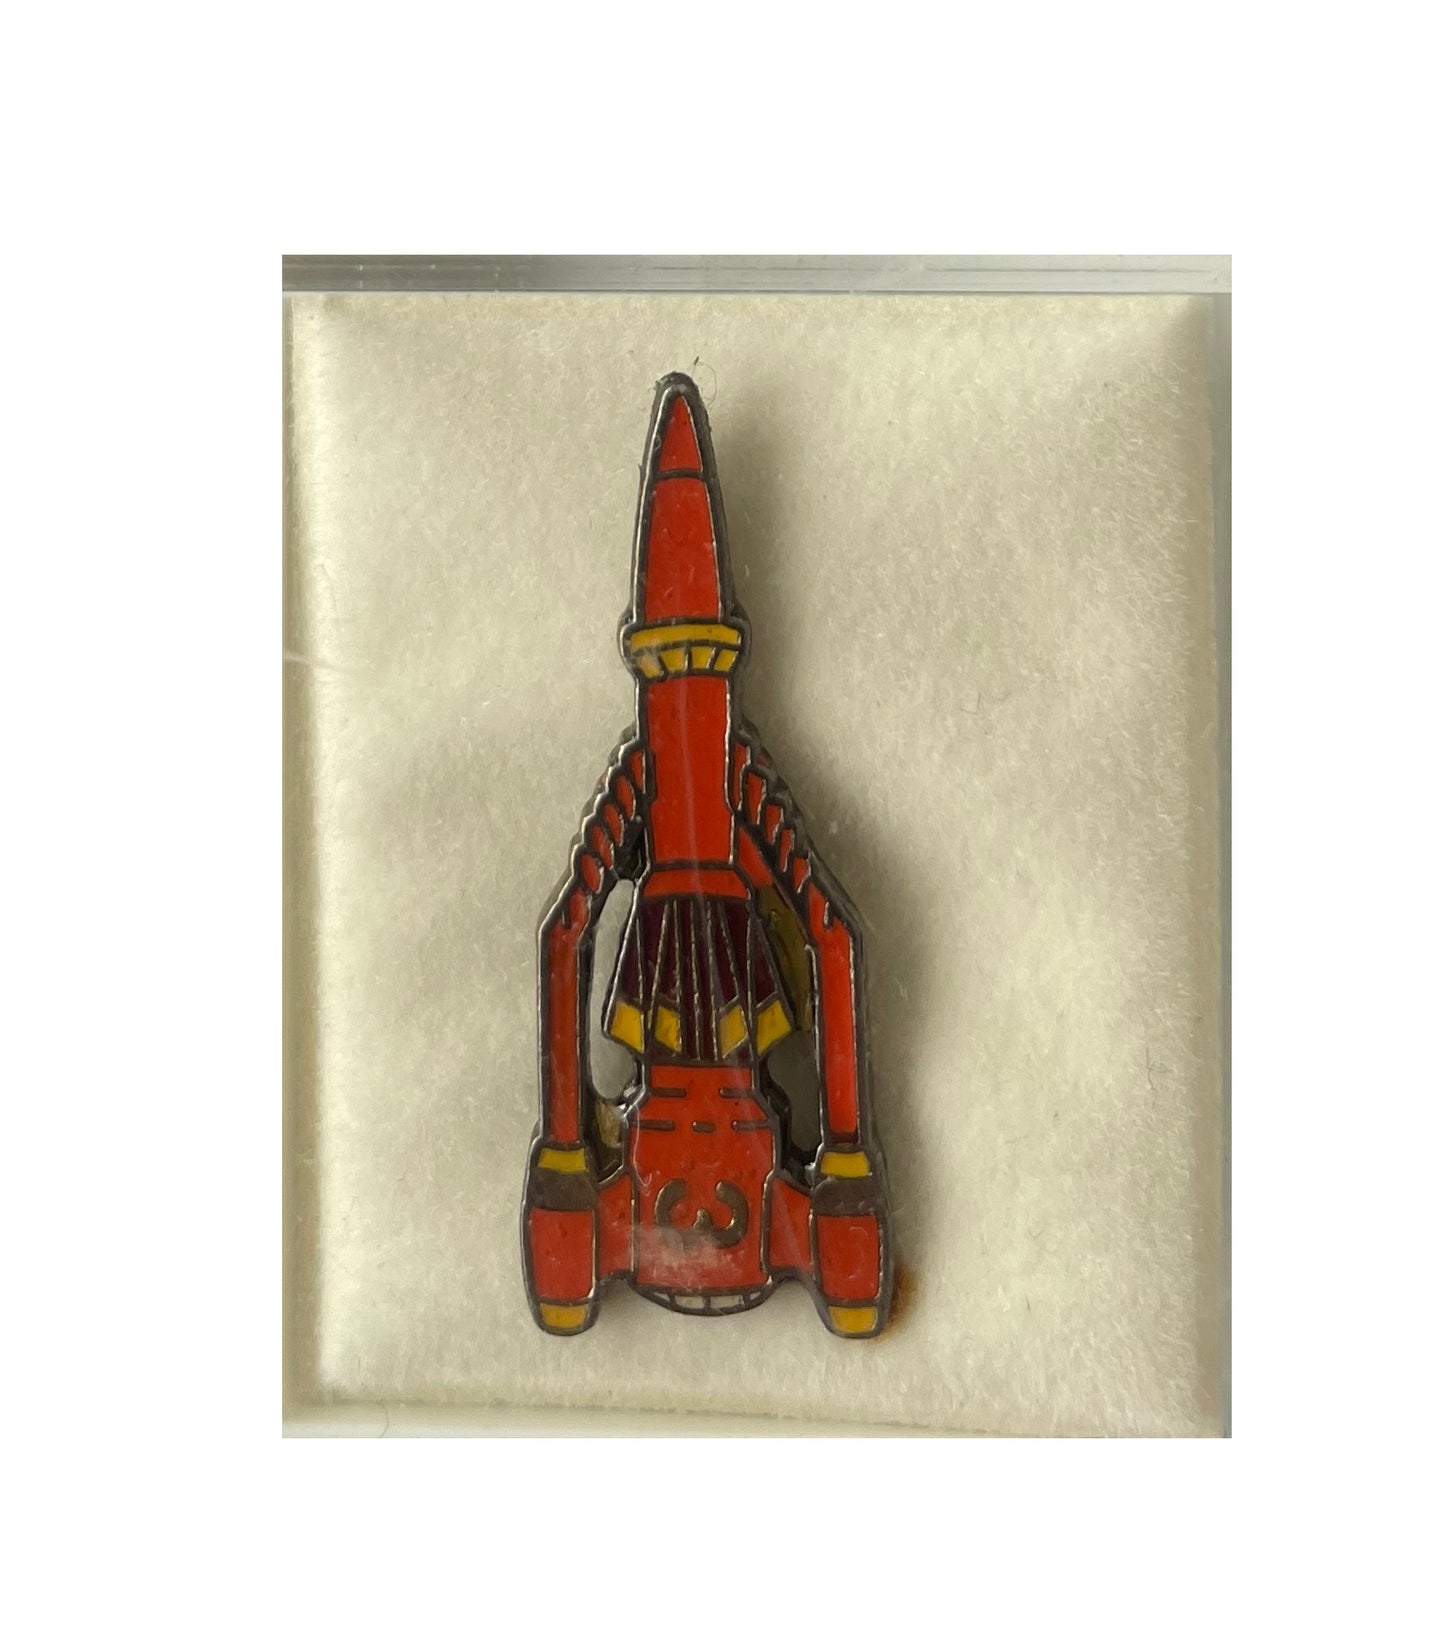 Vintage Pinpoint 1992 Gerry Andersons Thunderbirds Lapel Pin Badge - Thunderbird 3 - Brand New Factory Sealed Shop Stock Room Find